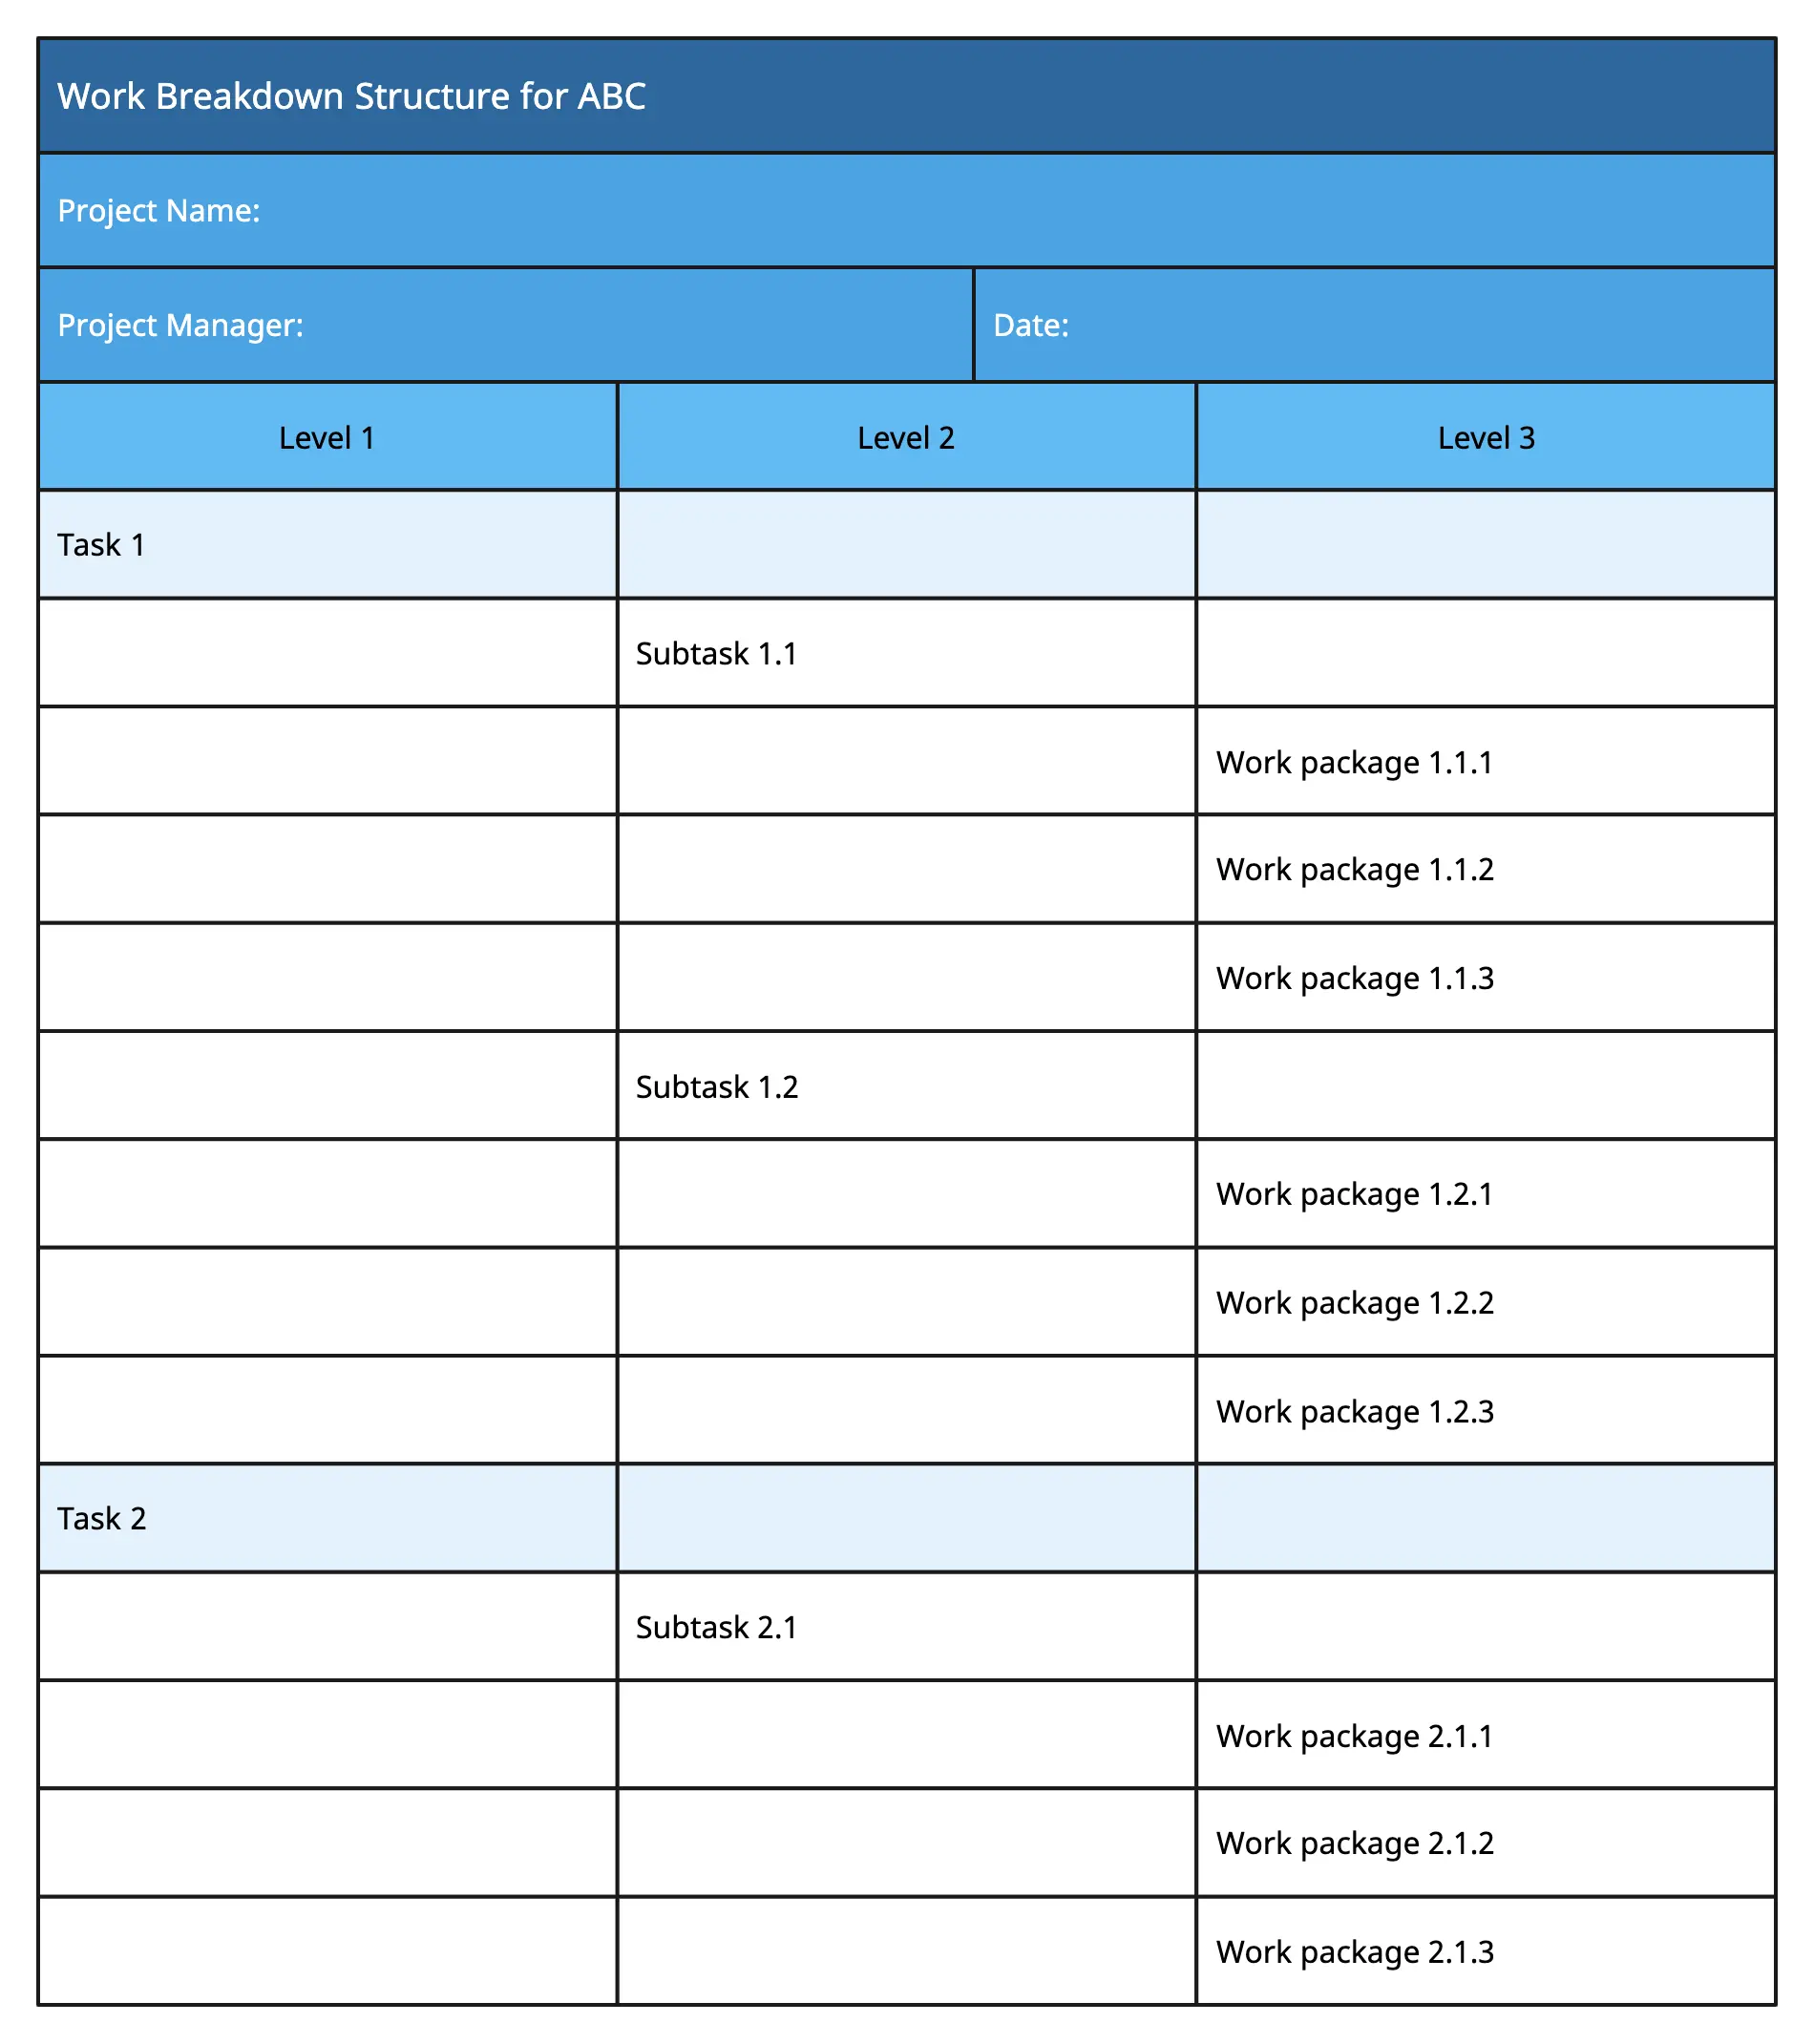 Tabular Work Breakdown Structure Template - How to create a work breakdown structure